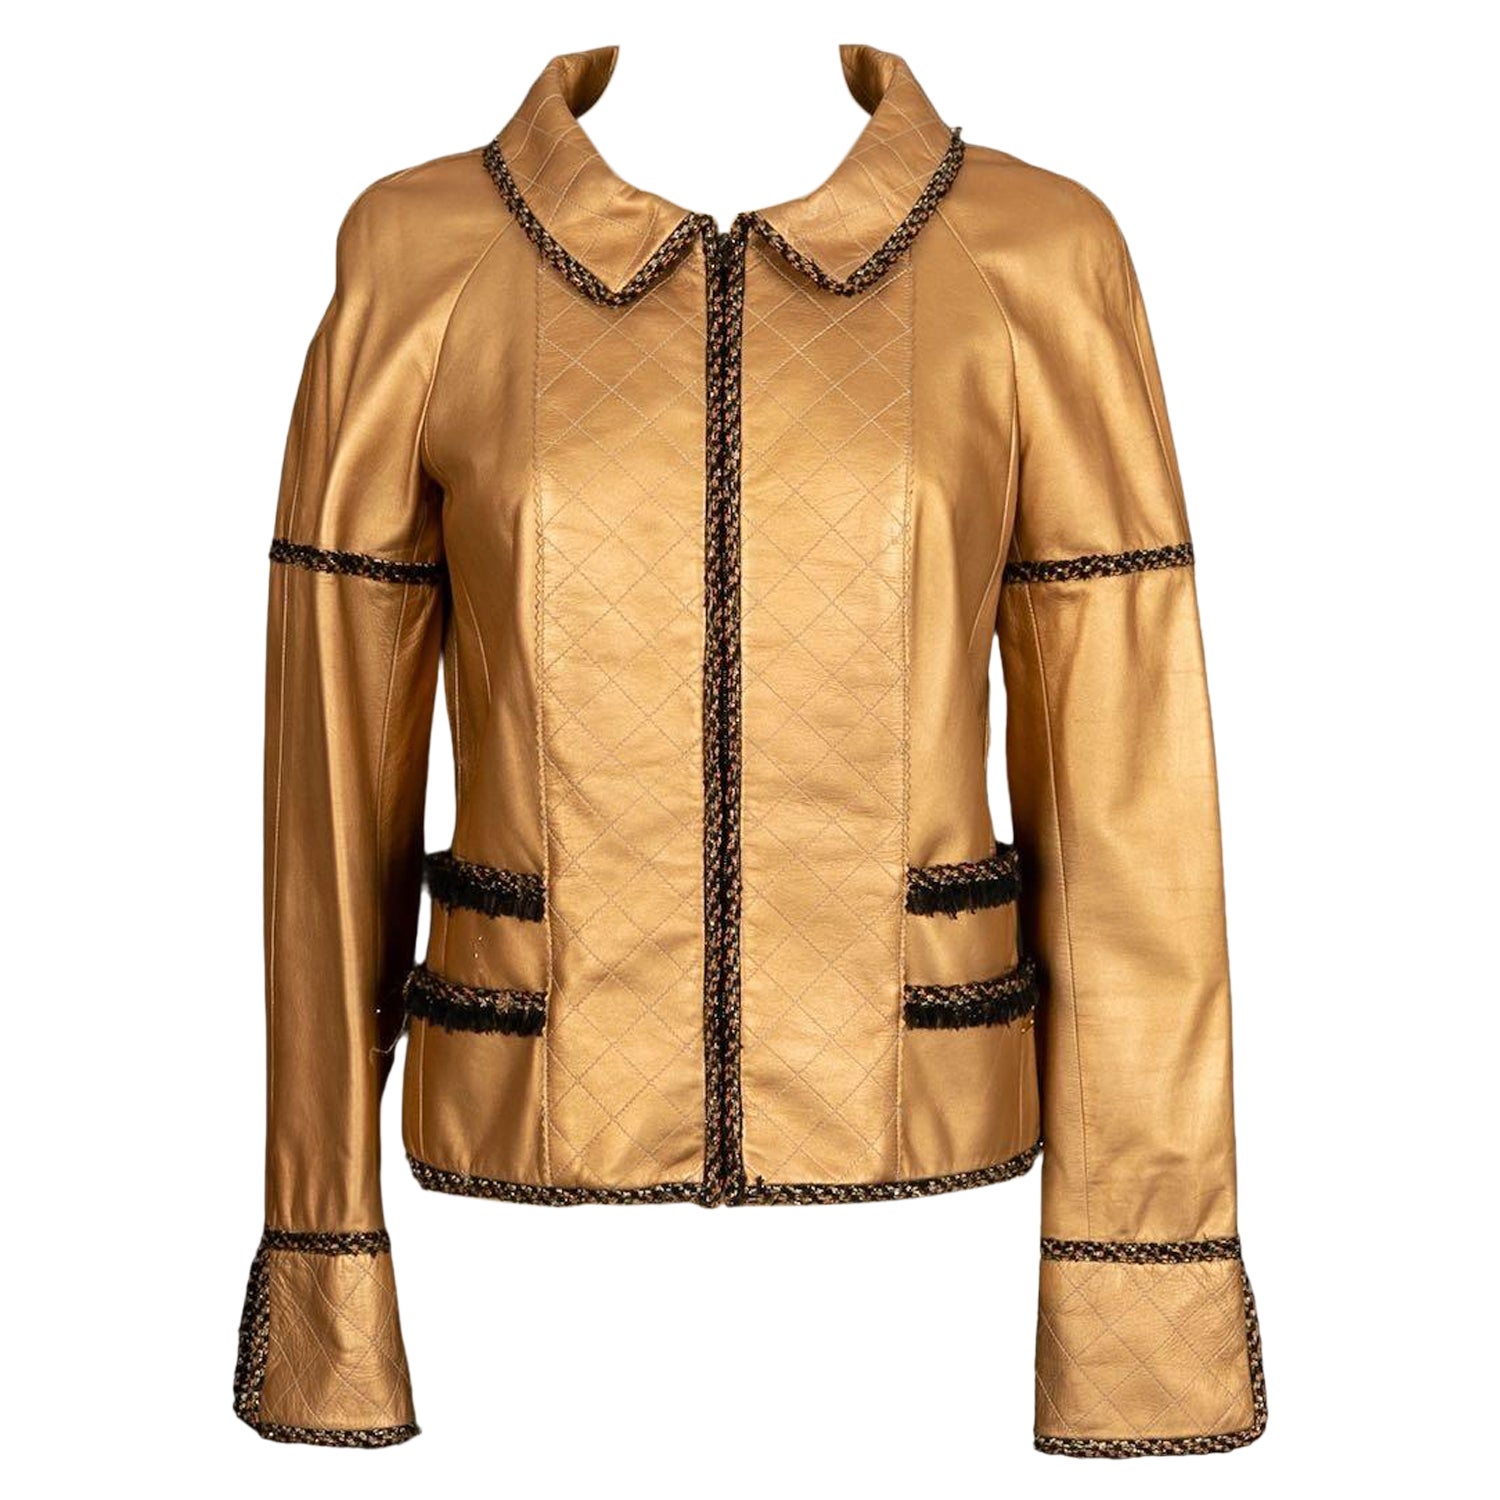 Chanel Bronze Lamb Leather Jacket with Silk Lining